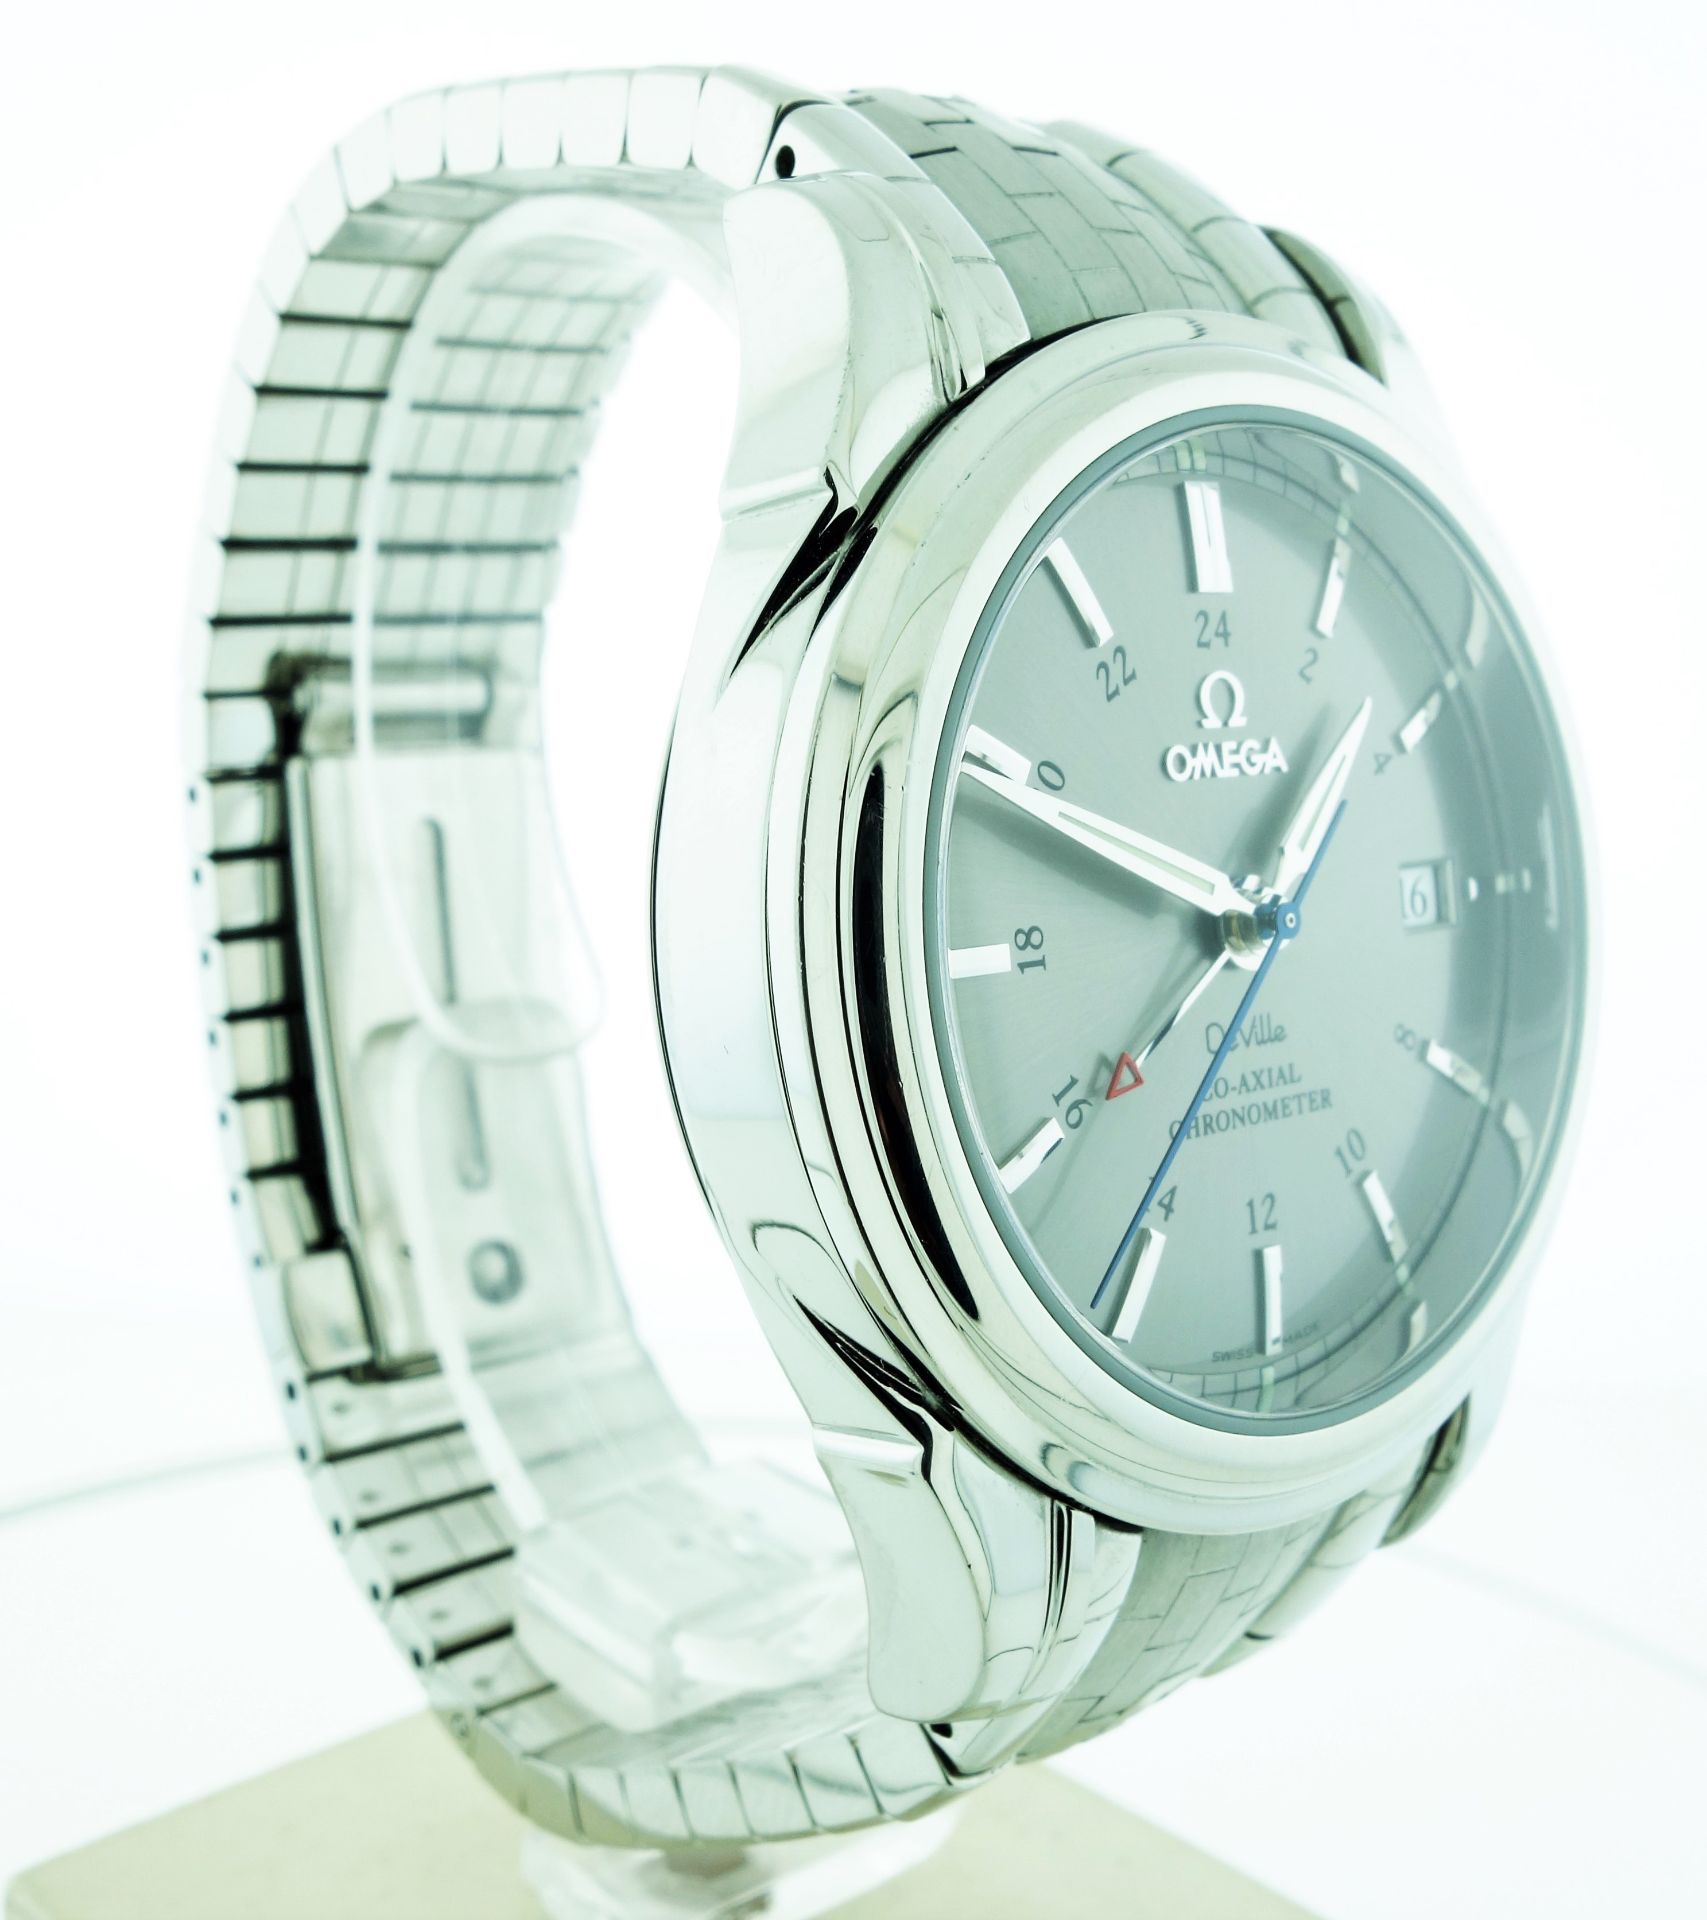 Omega Co-Axial GMT Chronometer – 45334100 - Image 3 of 4